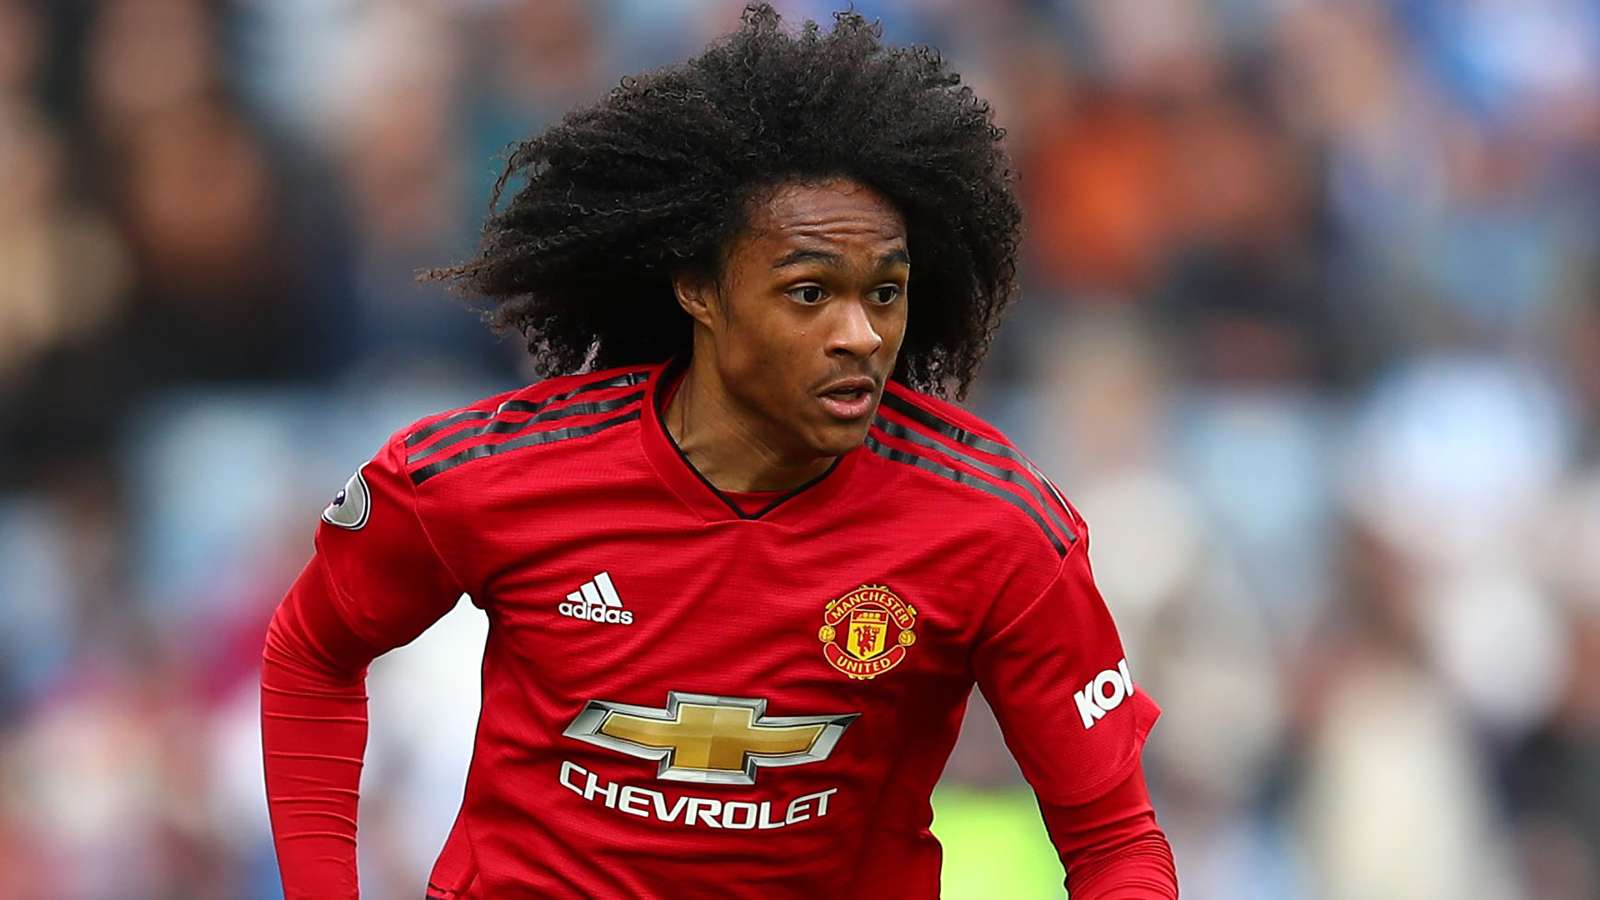 MANCHESTER UNITED: SOME FANS WANT TAHITH CHONG TO BE LOANED OUT - Bóng Đá